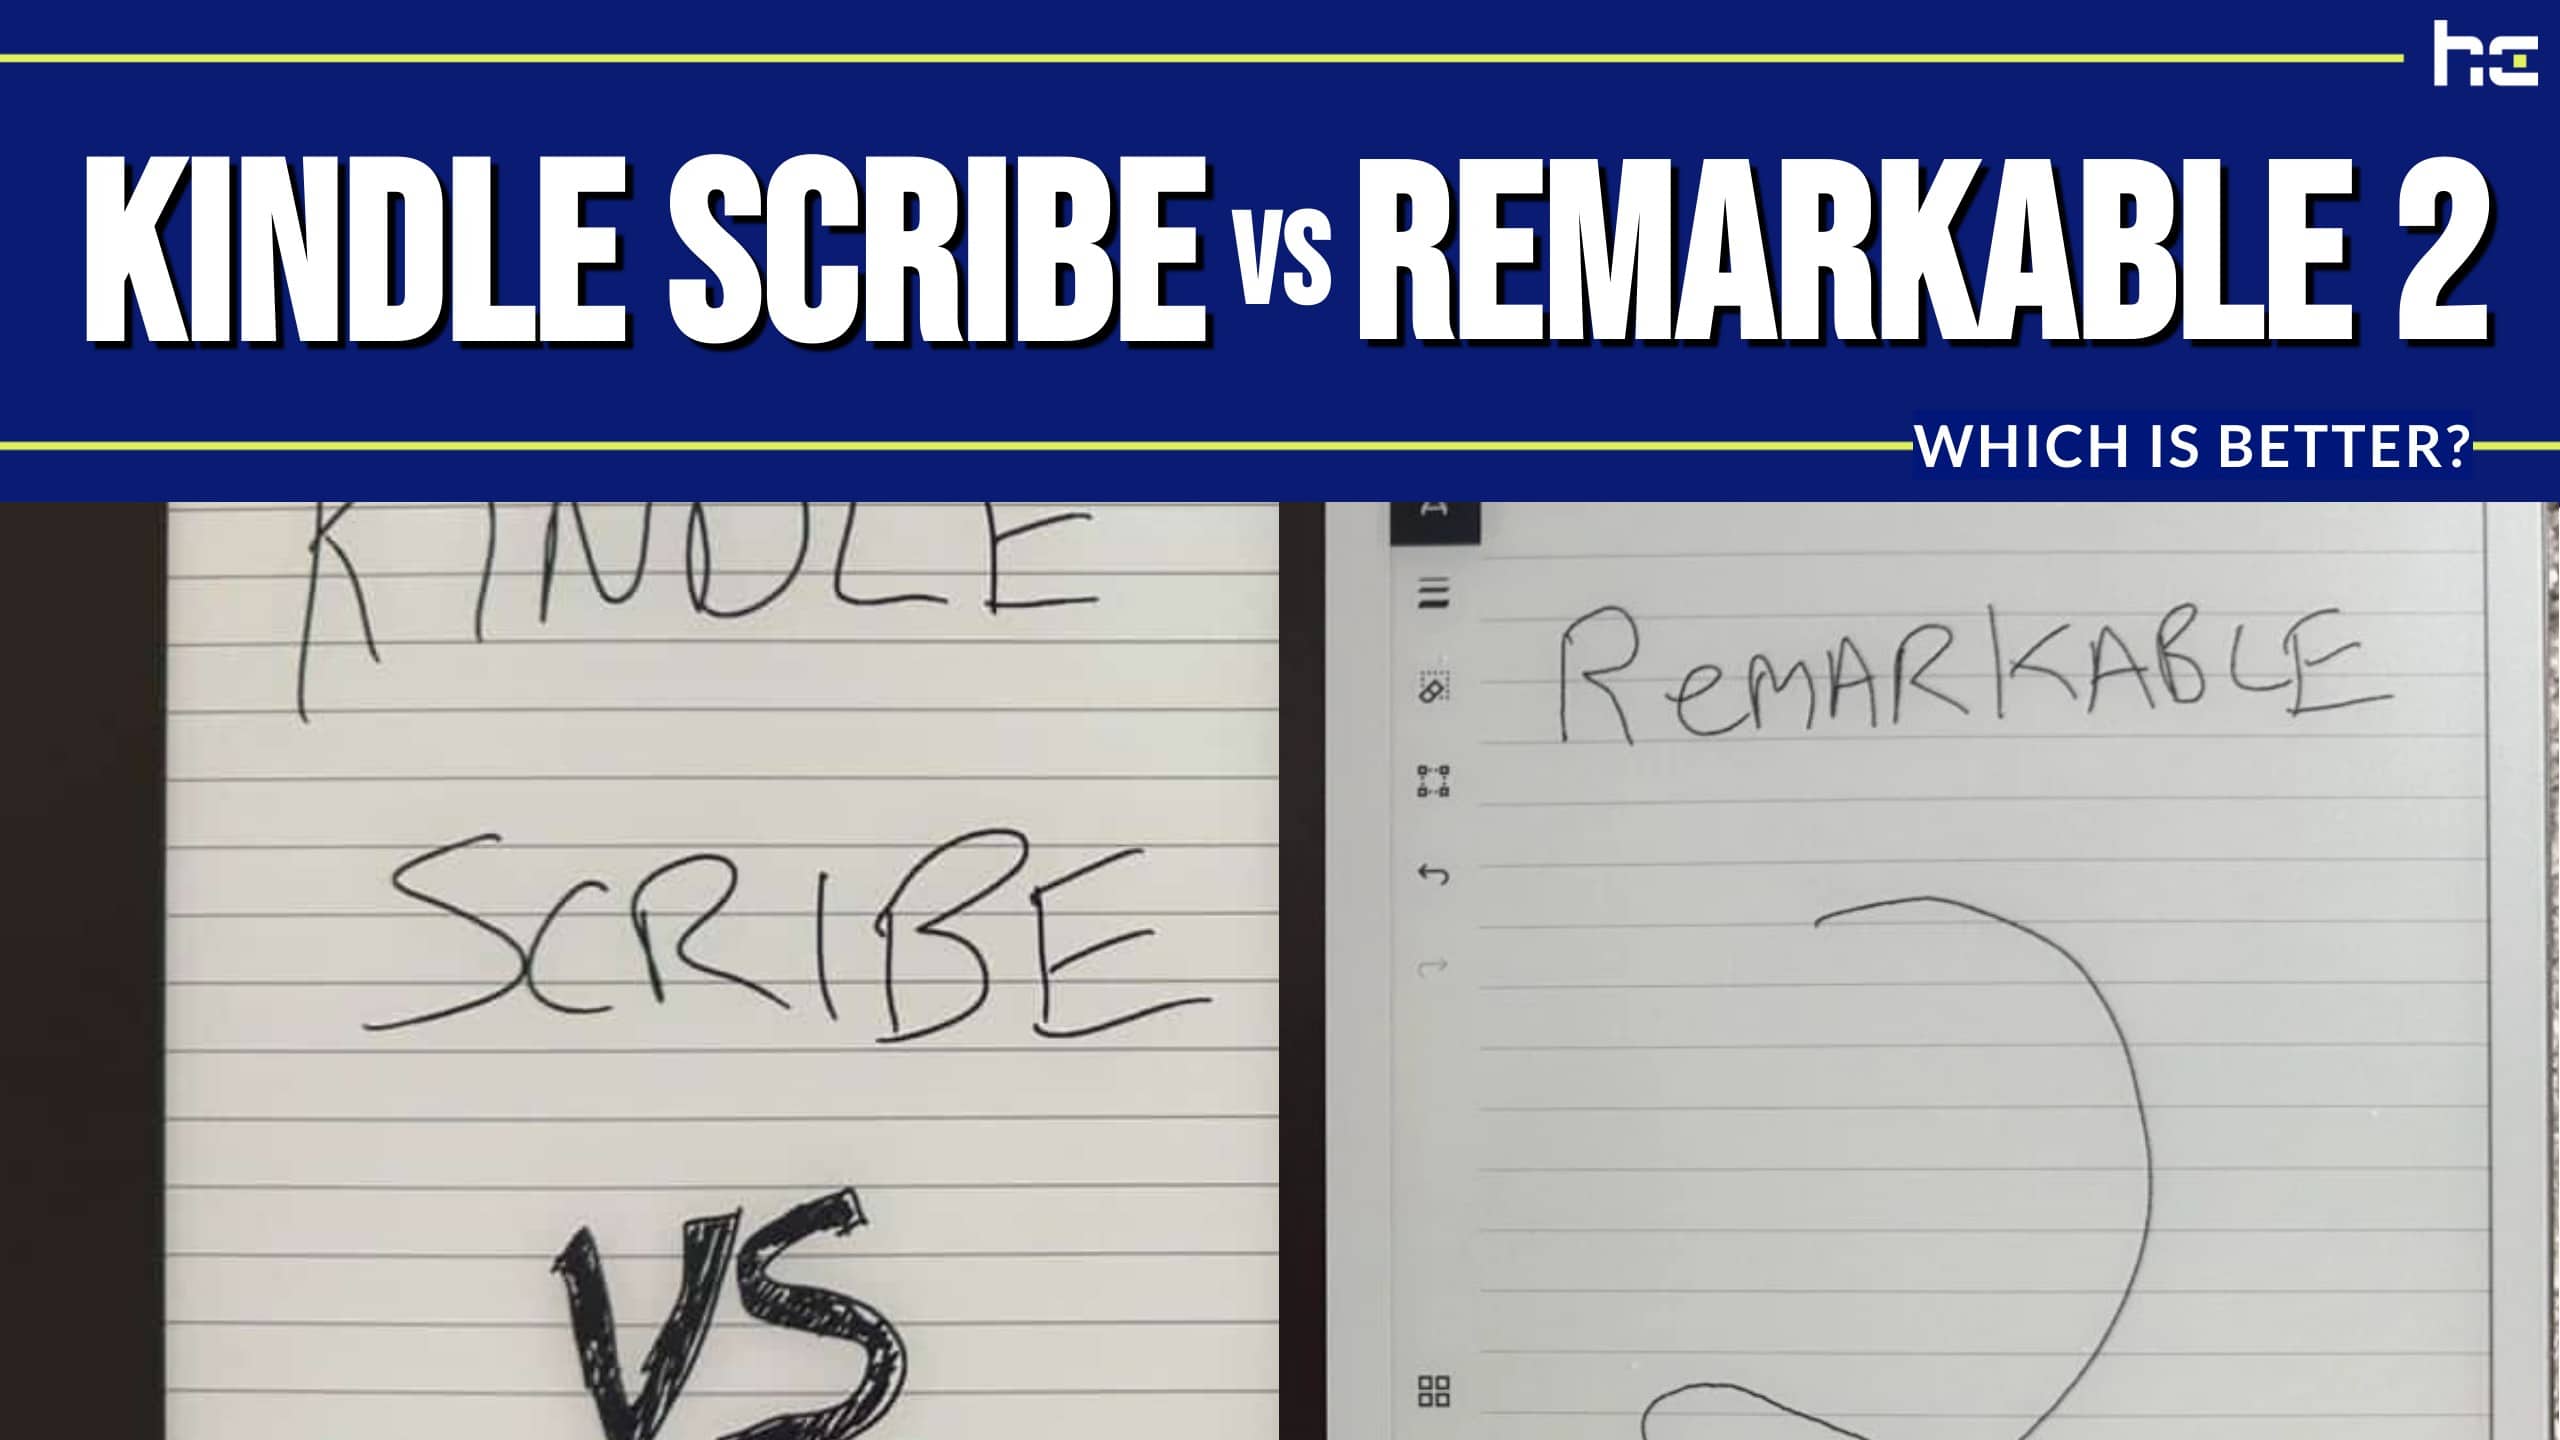 featured image for Kindle Scribe vs reMarkable 2